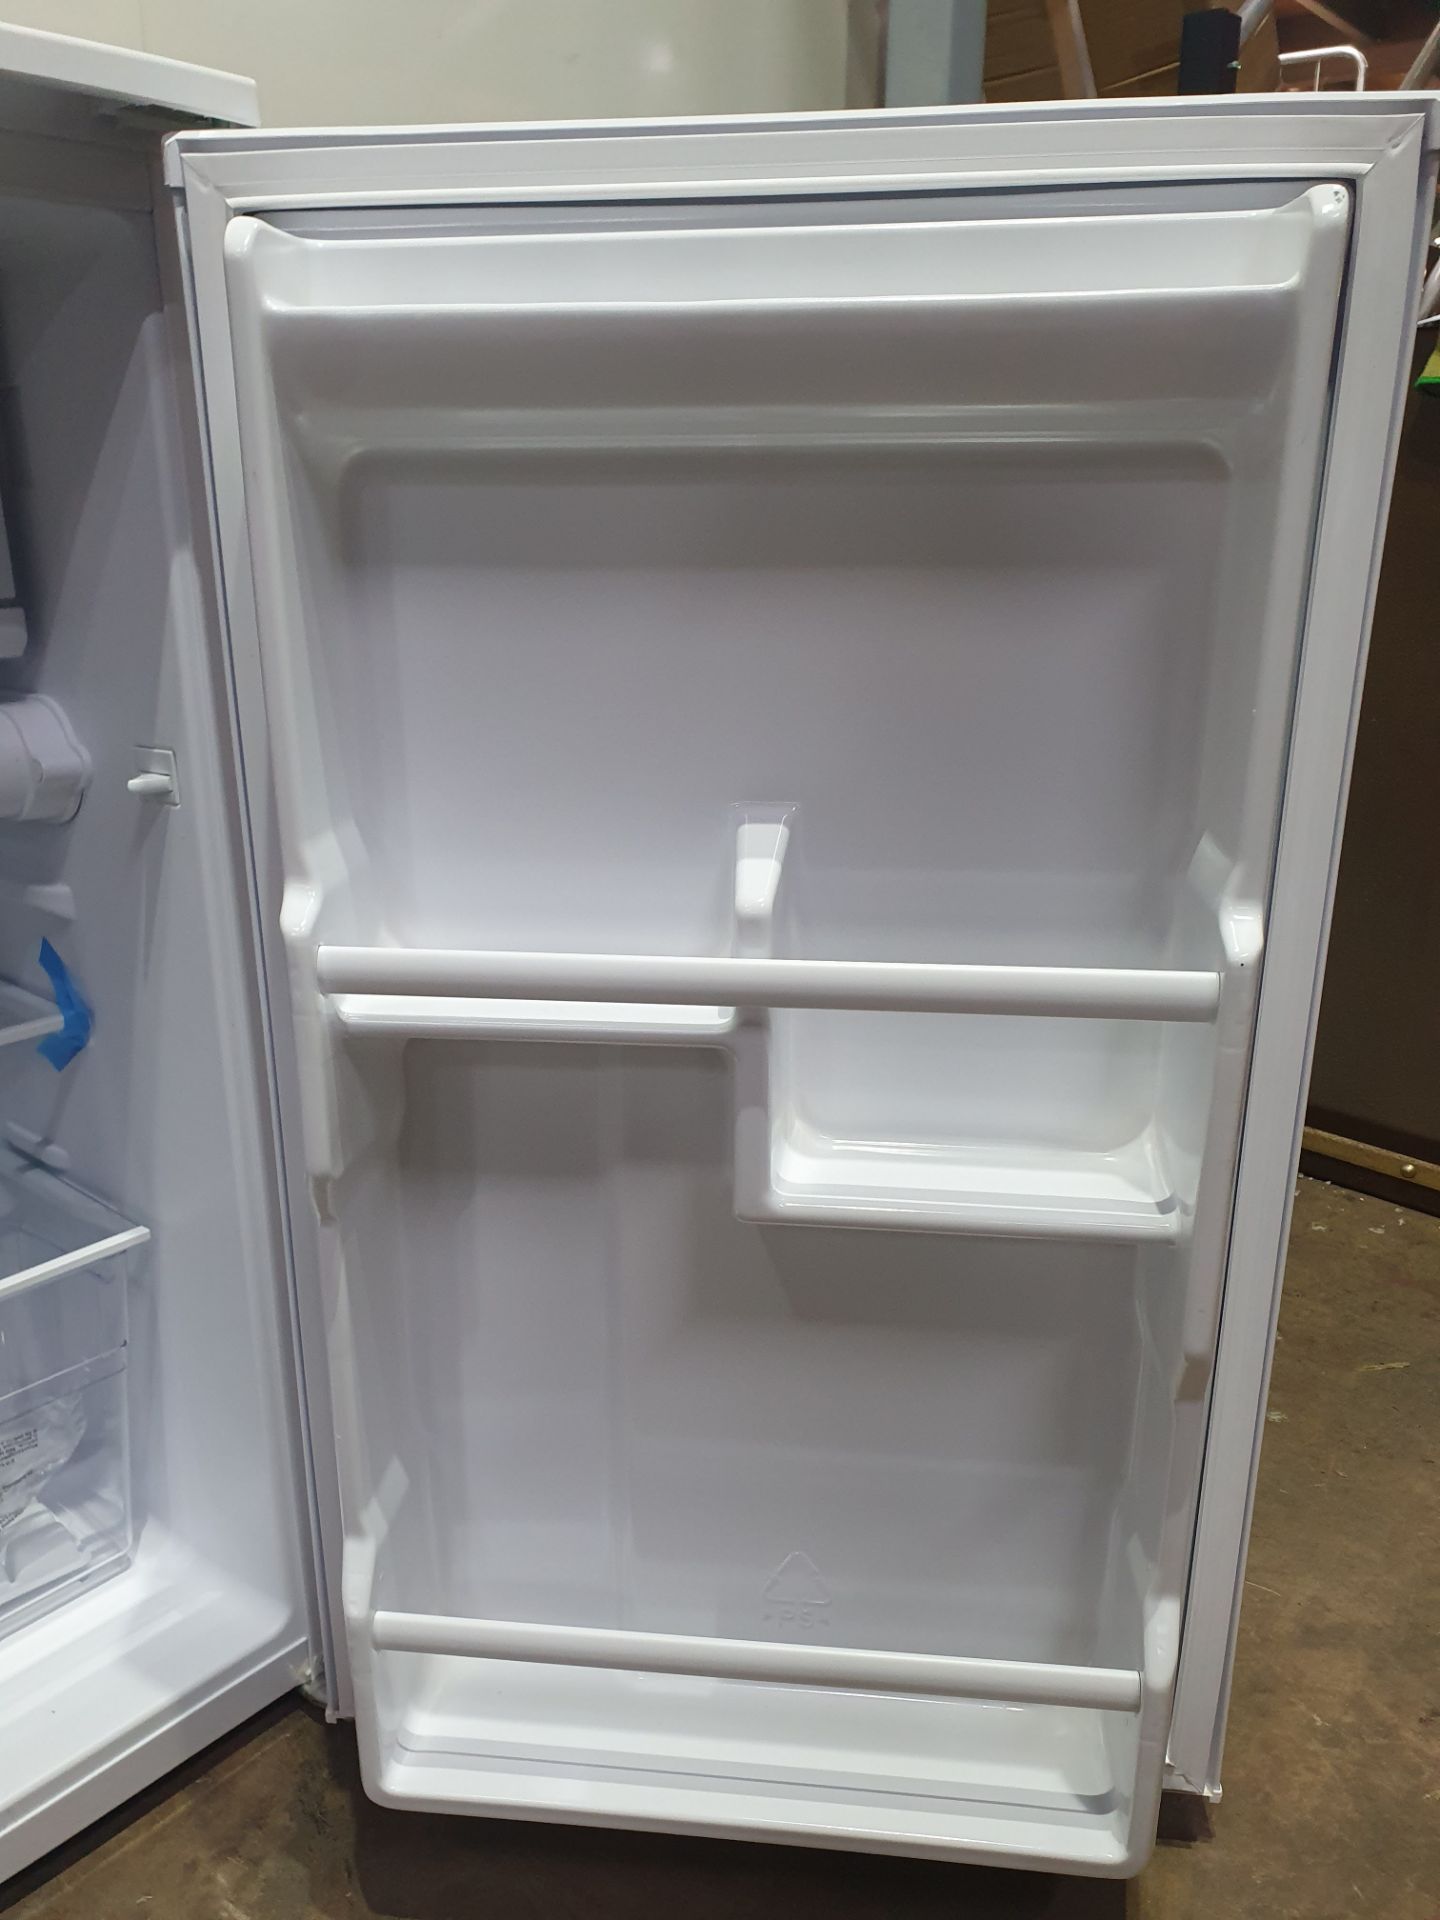 Ex-Display White Knight DAF150H 50cm Wide Under Counter Fridge with Icebox - Image 3 of 7